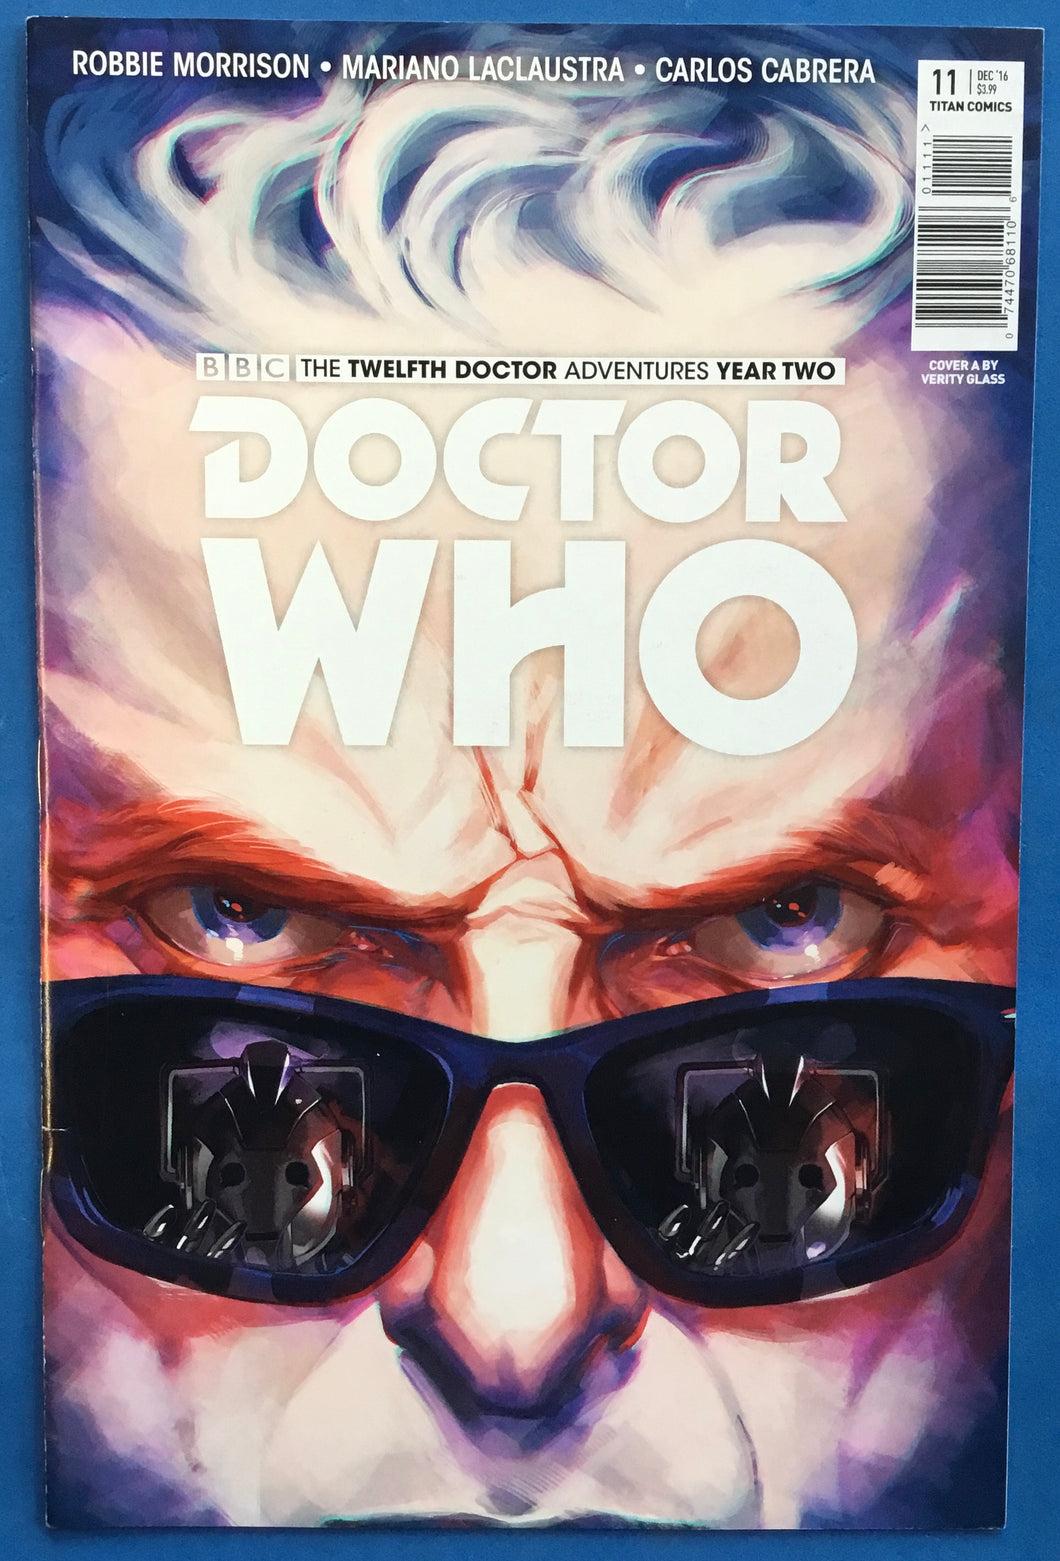 Doctor Who: The Twelfth Doctor Year Two No. #11(A) 2016 Titan Comics